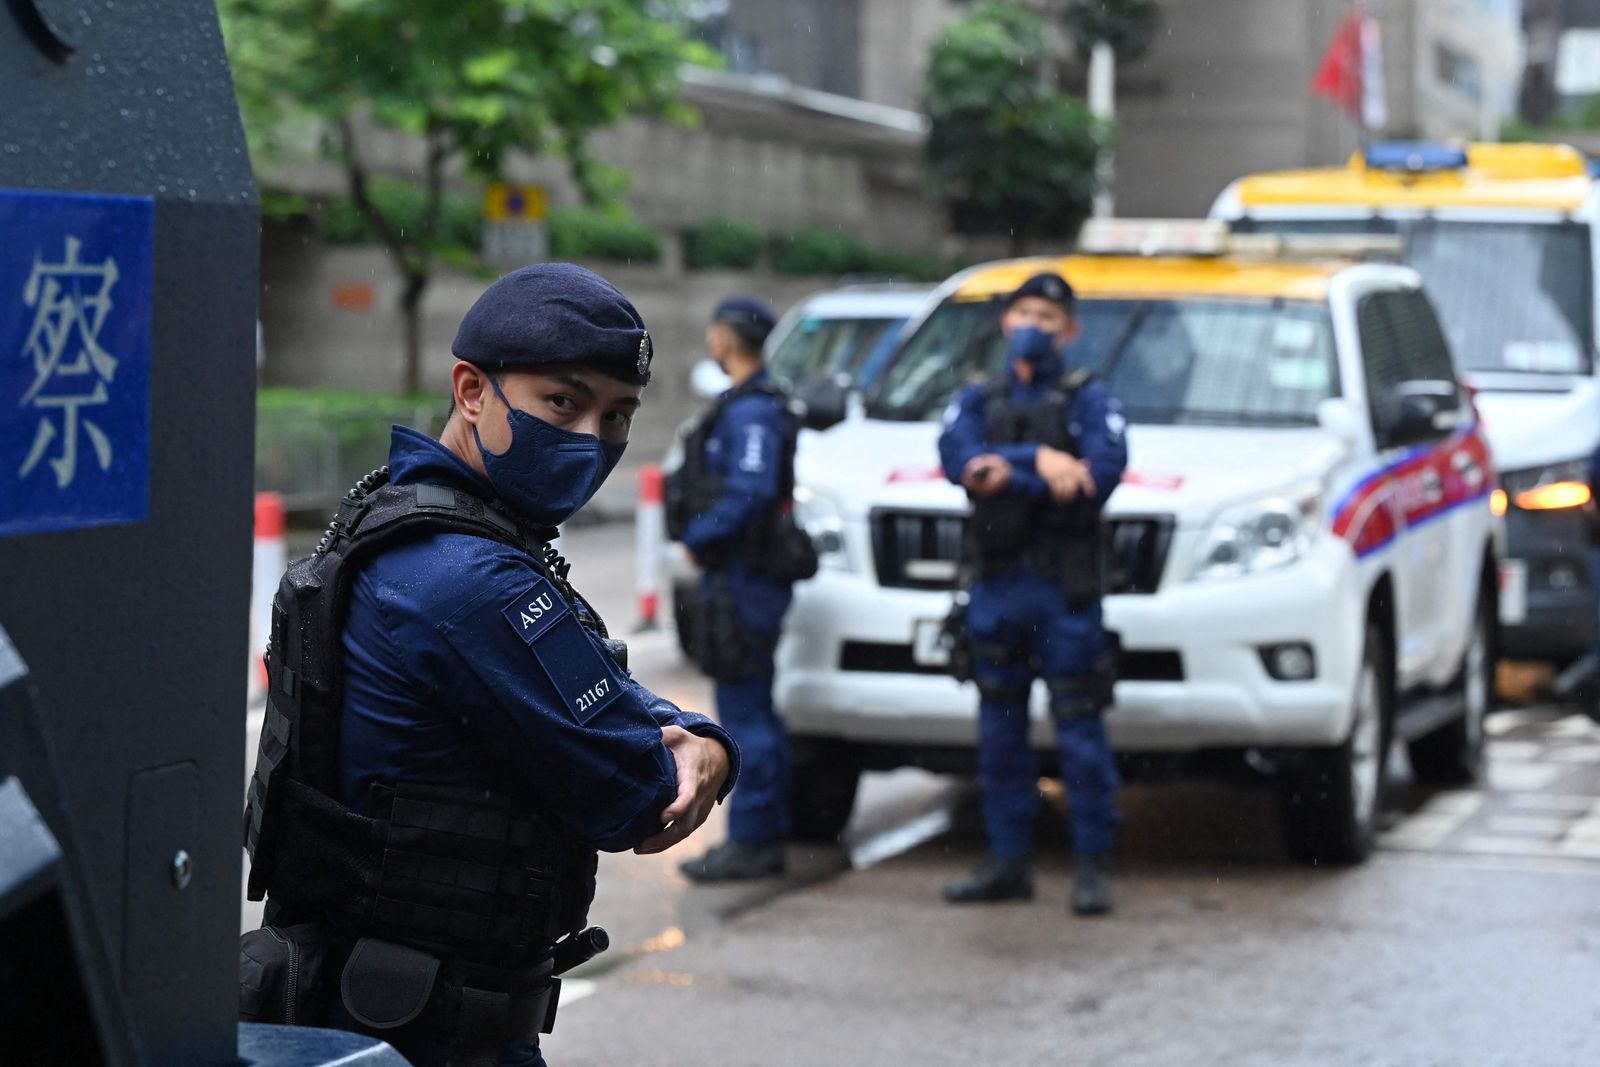 A special unit of the Hong Kong police provides security in the city's Wanchai district on June 30, 2022, as Chinese President Xi Jinping arrives in Hong Kong to attend celebrations marking the 25th anniversary of the city's handover from Britain to China. (Photo by Peter PARKS / AFP) - AFP